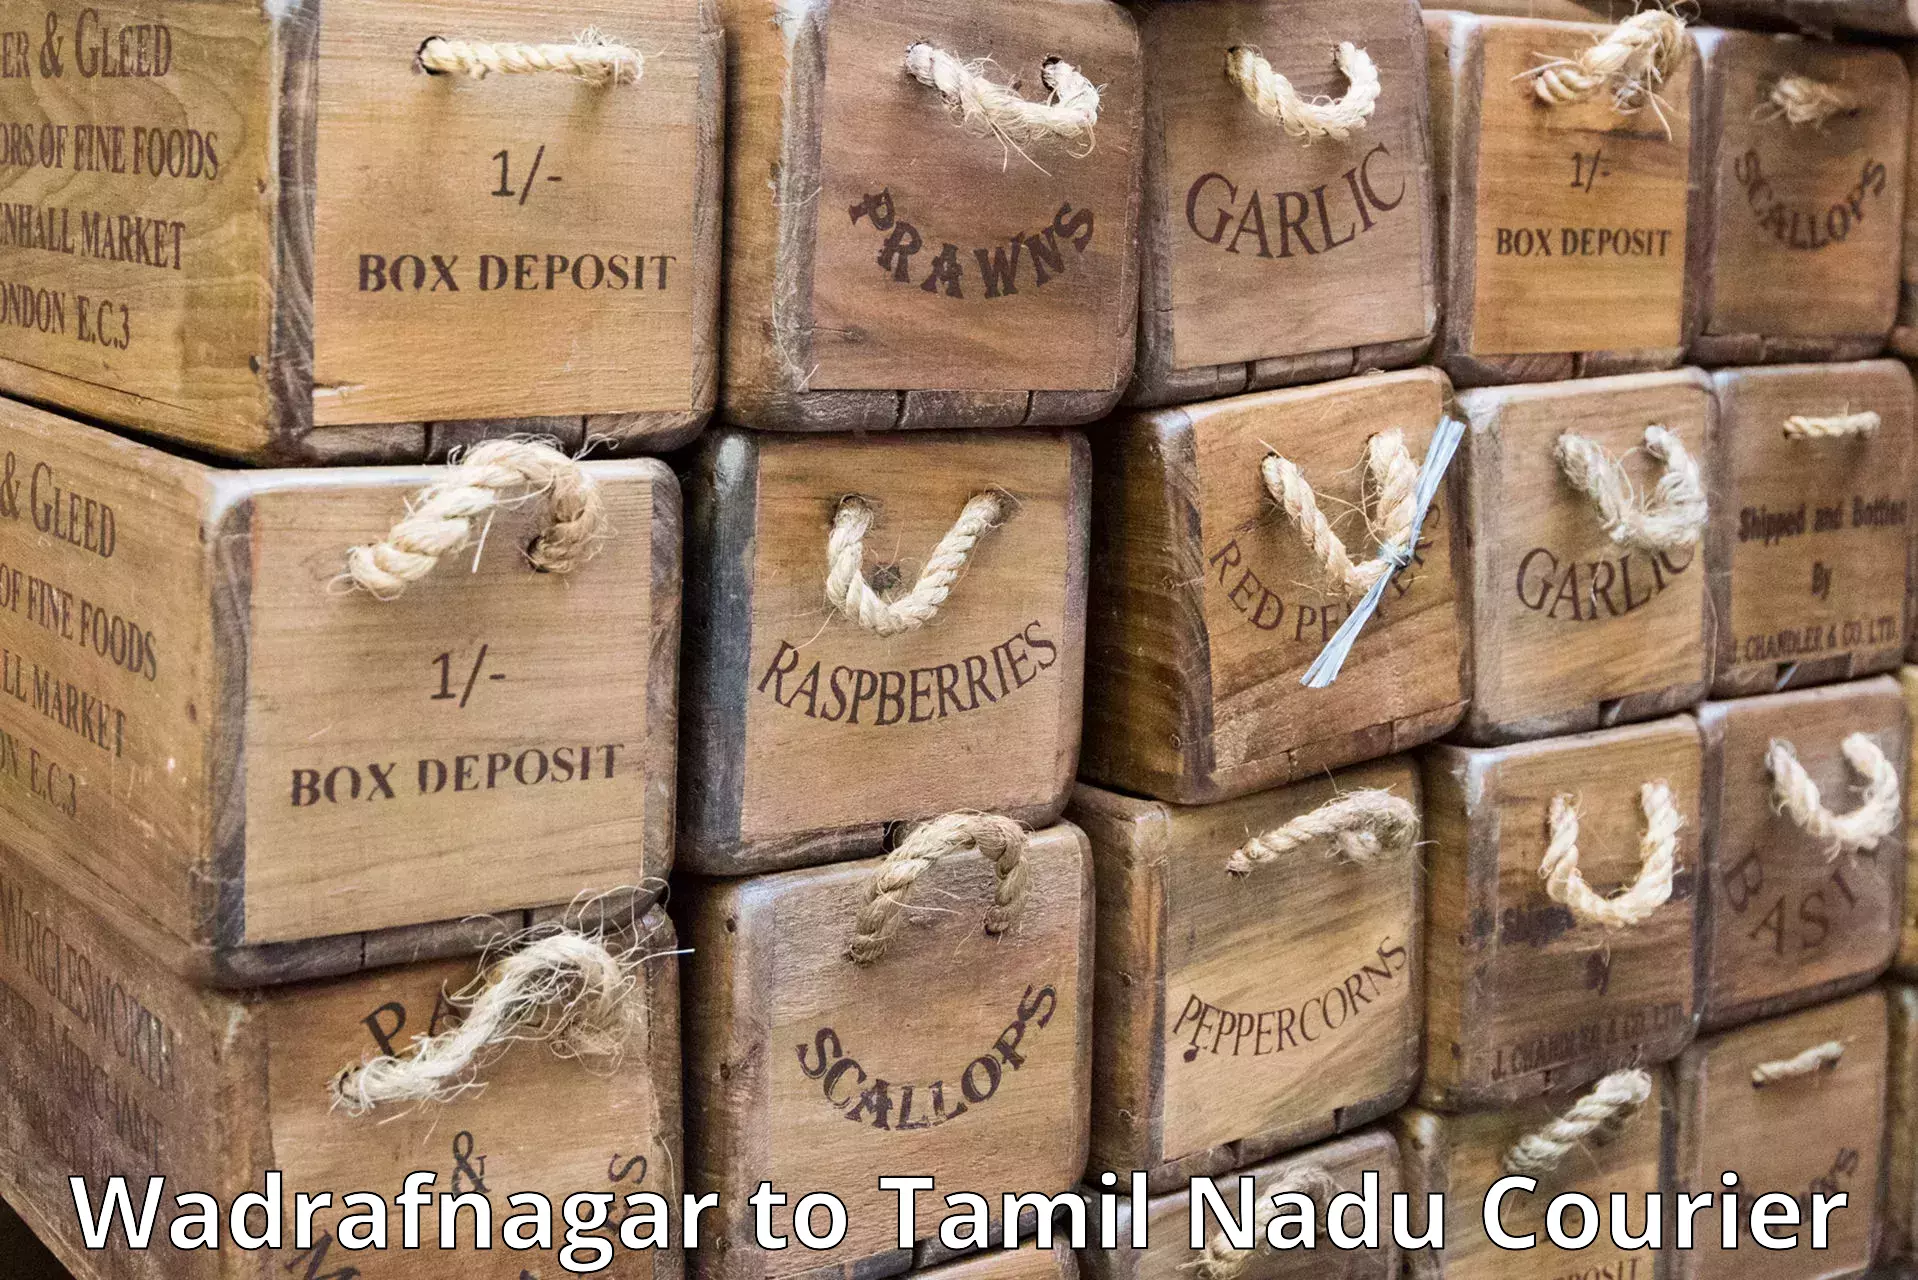 Reliable courier service Wadrafnagar to Mettupalayam